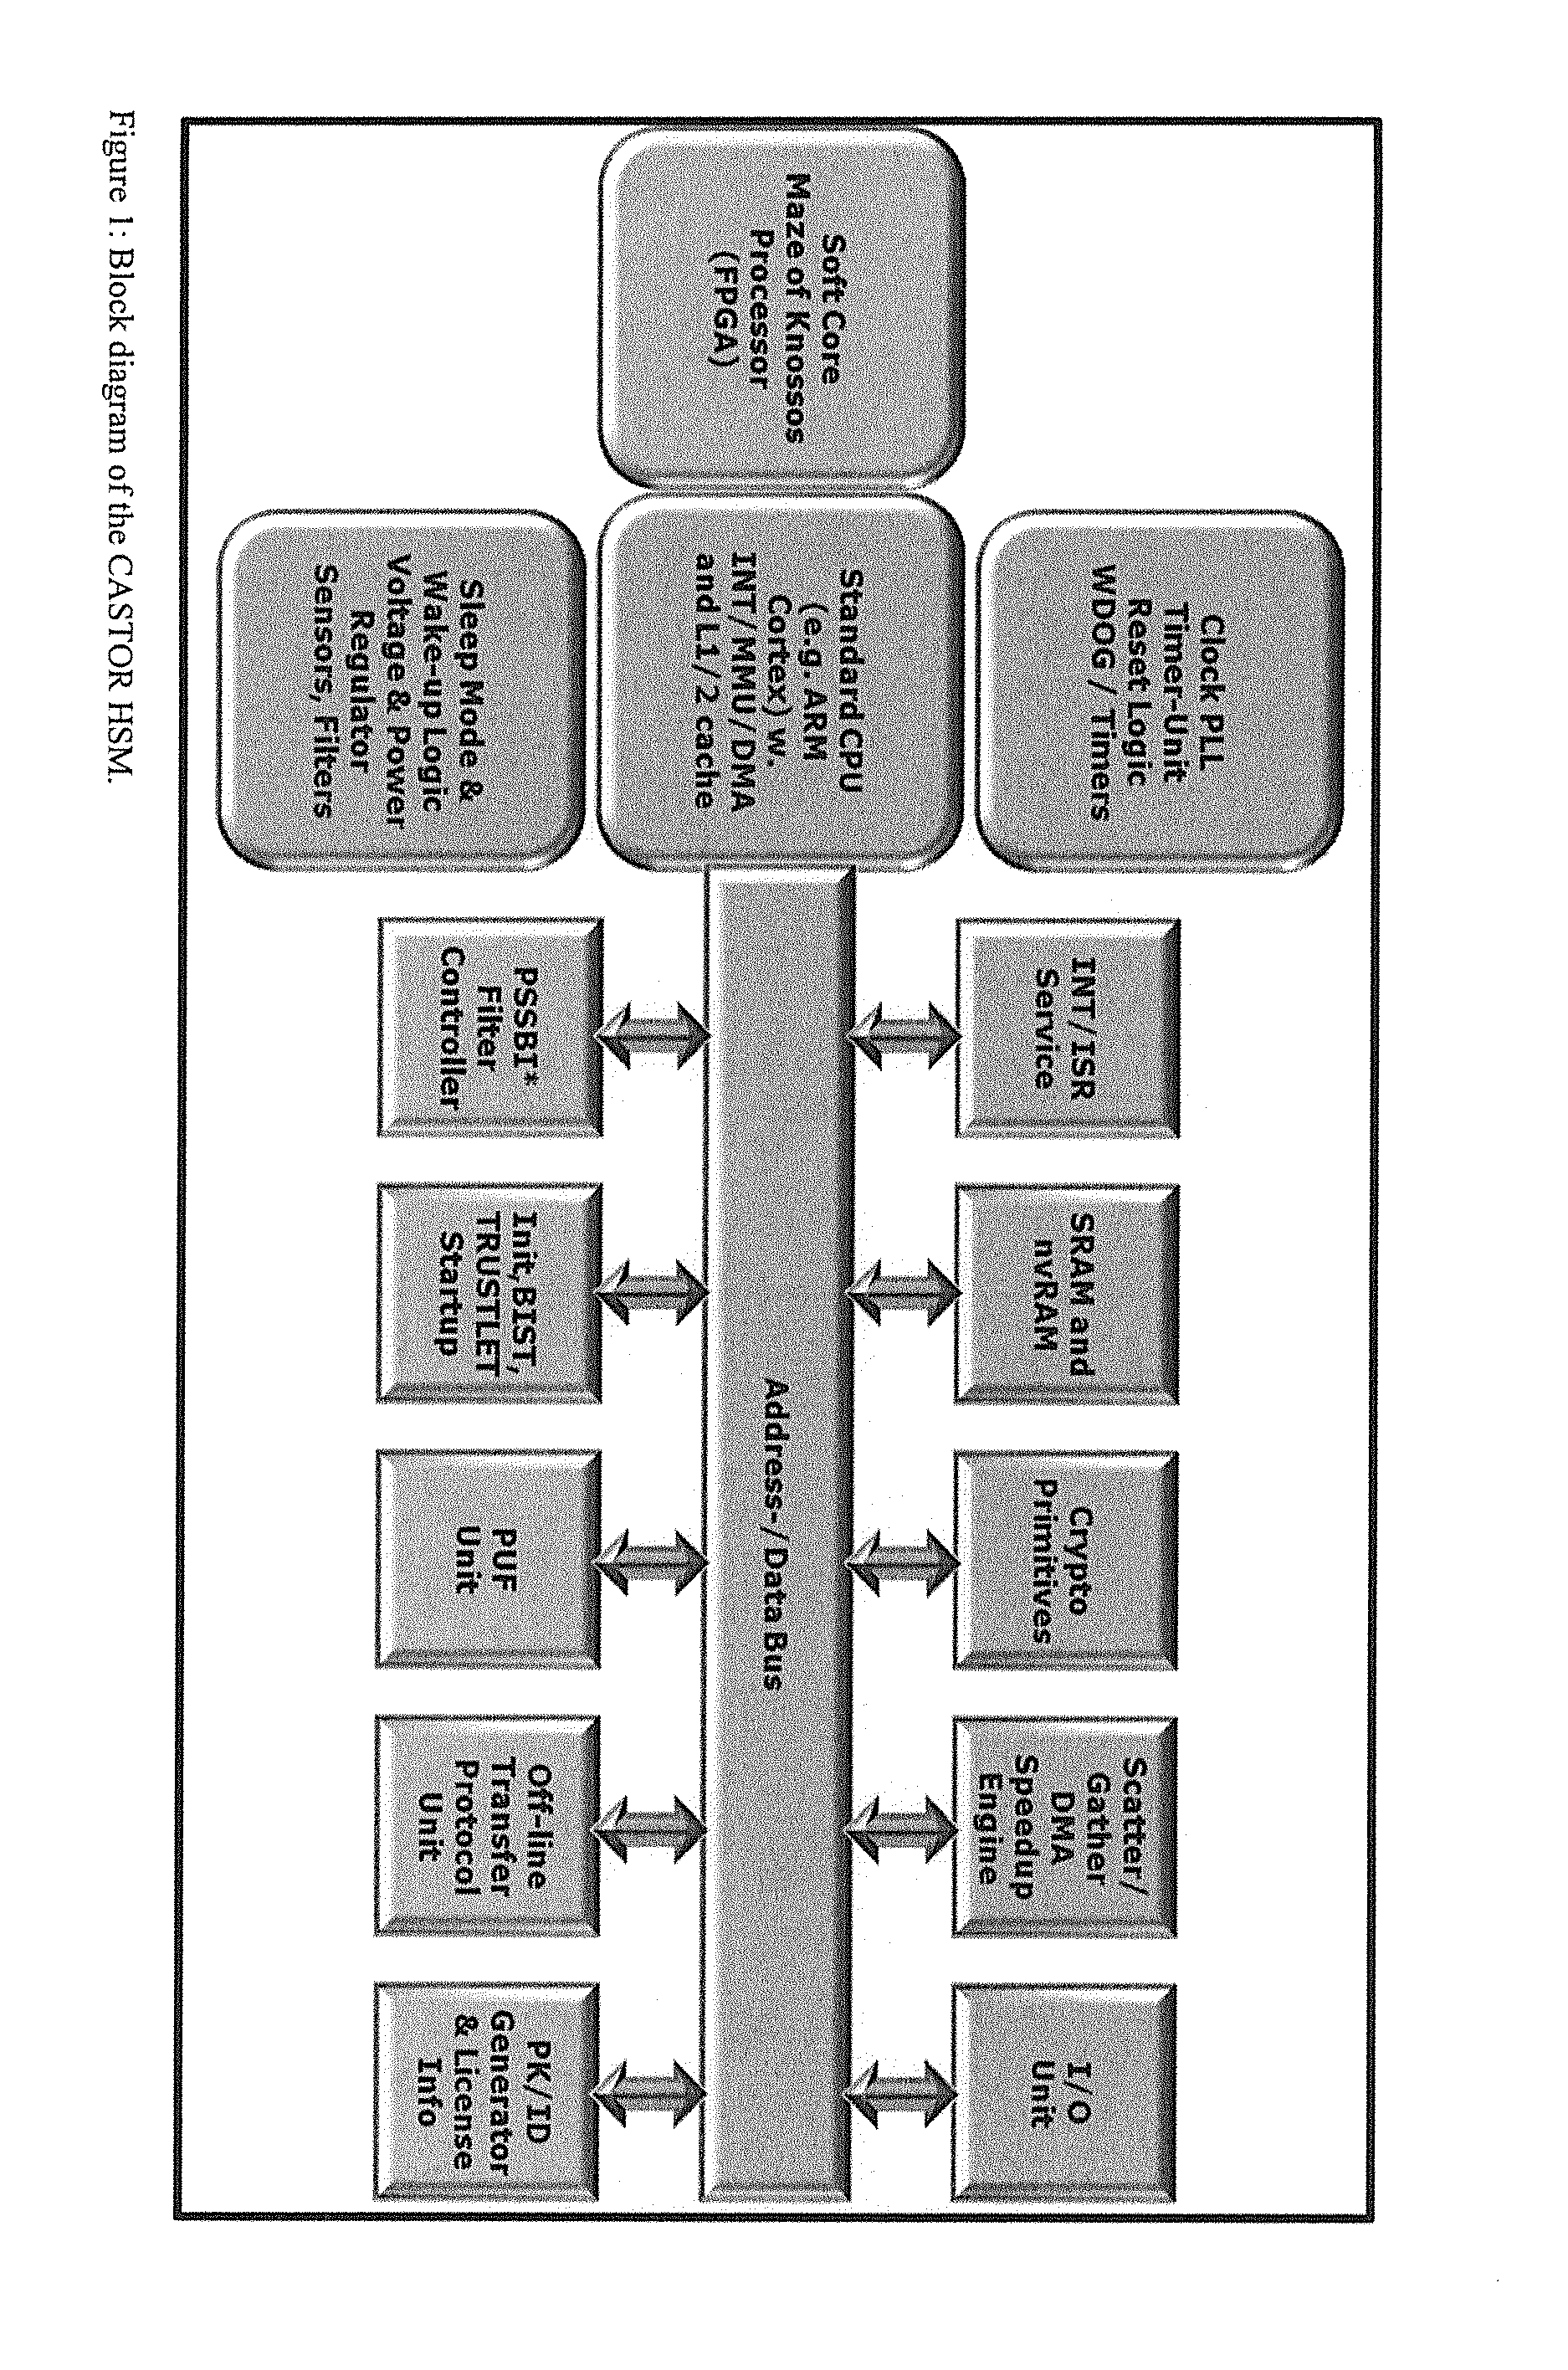 Tamper-protected hardware and method for using same